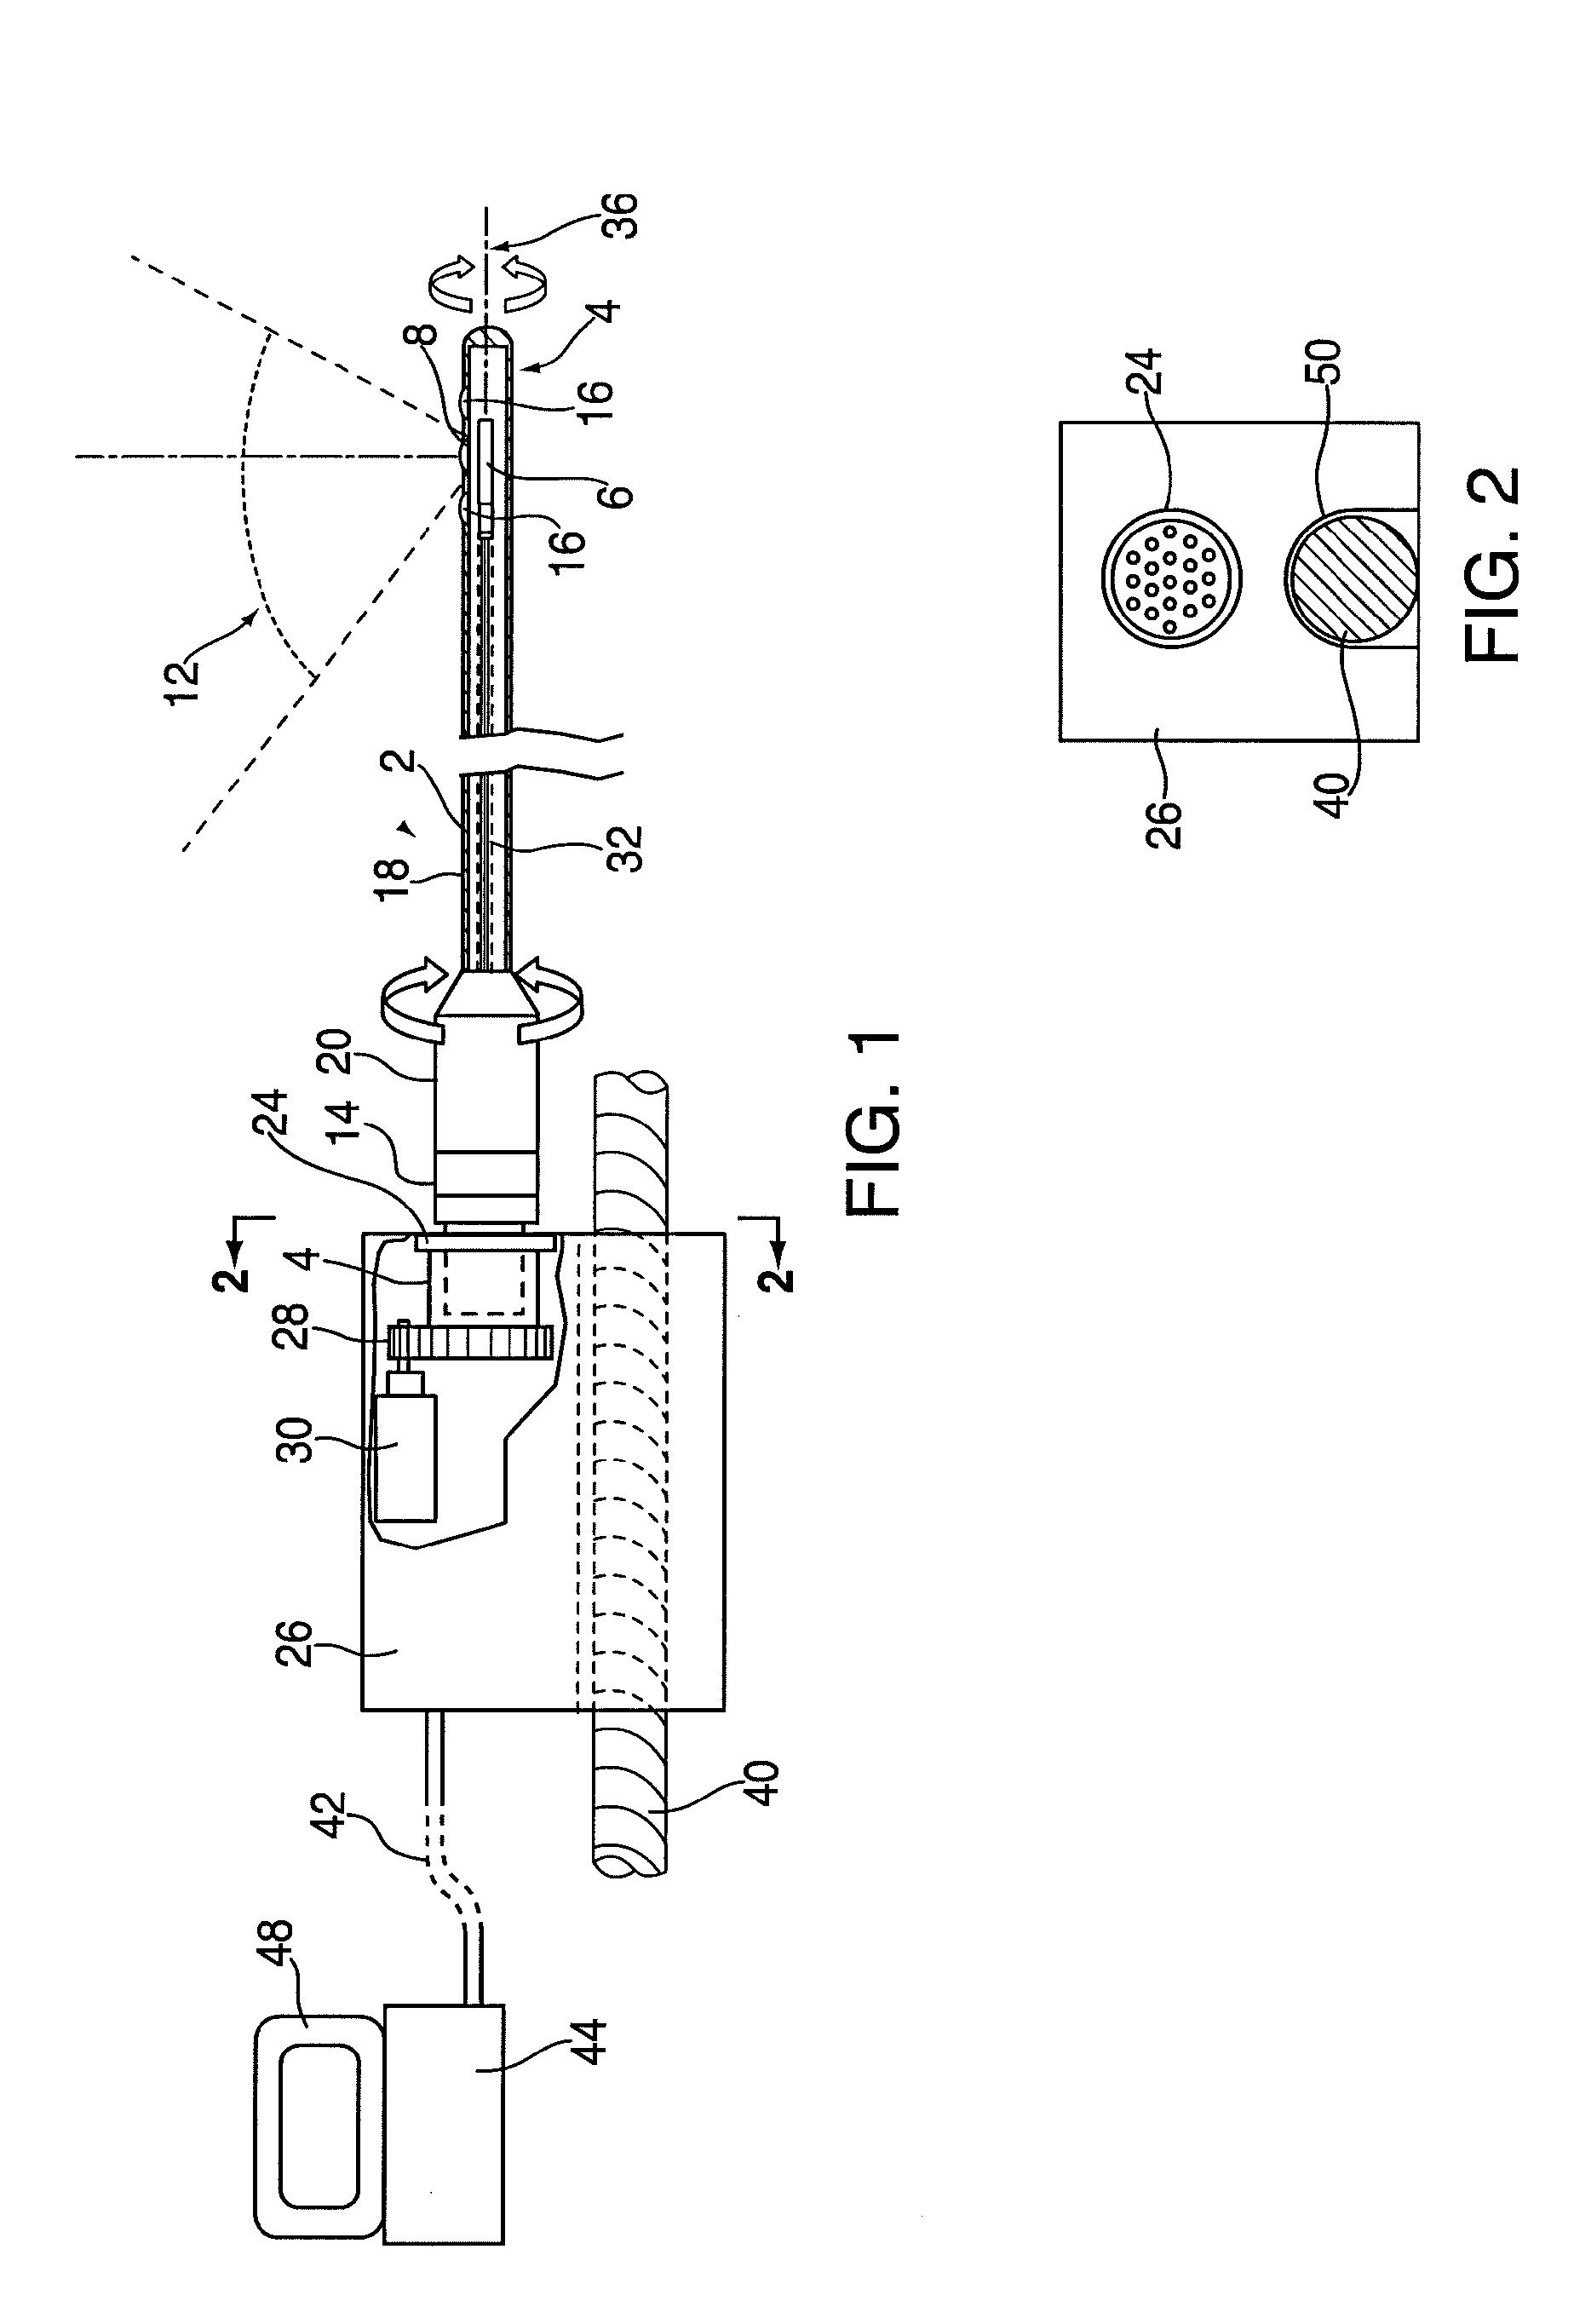 Method and endoscopic device for examining or imaging an interior surface of a corporeal cavity